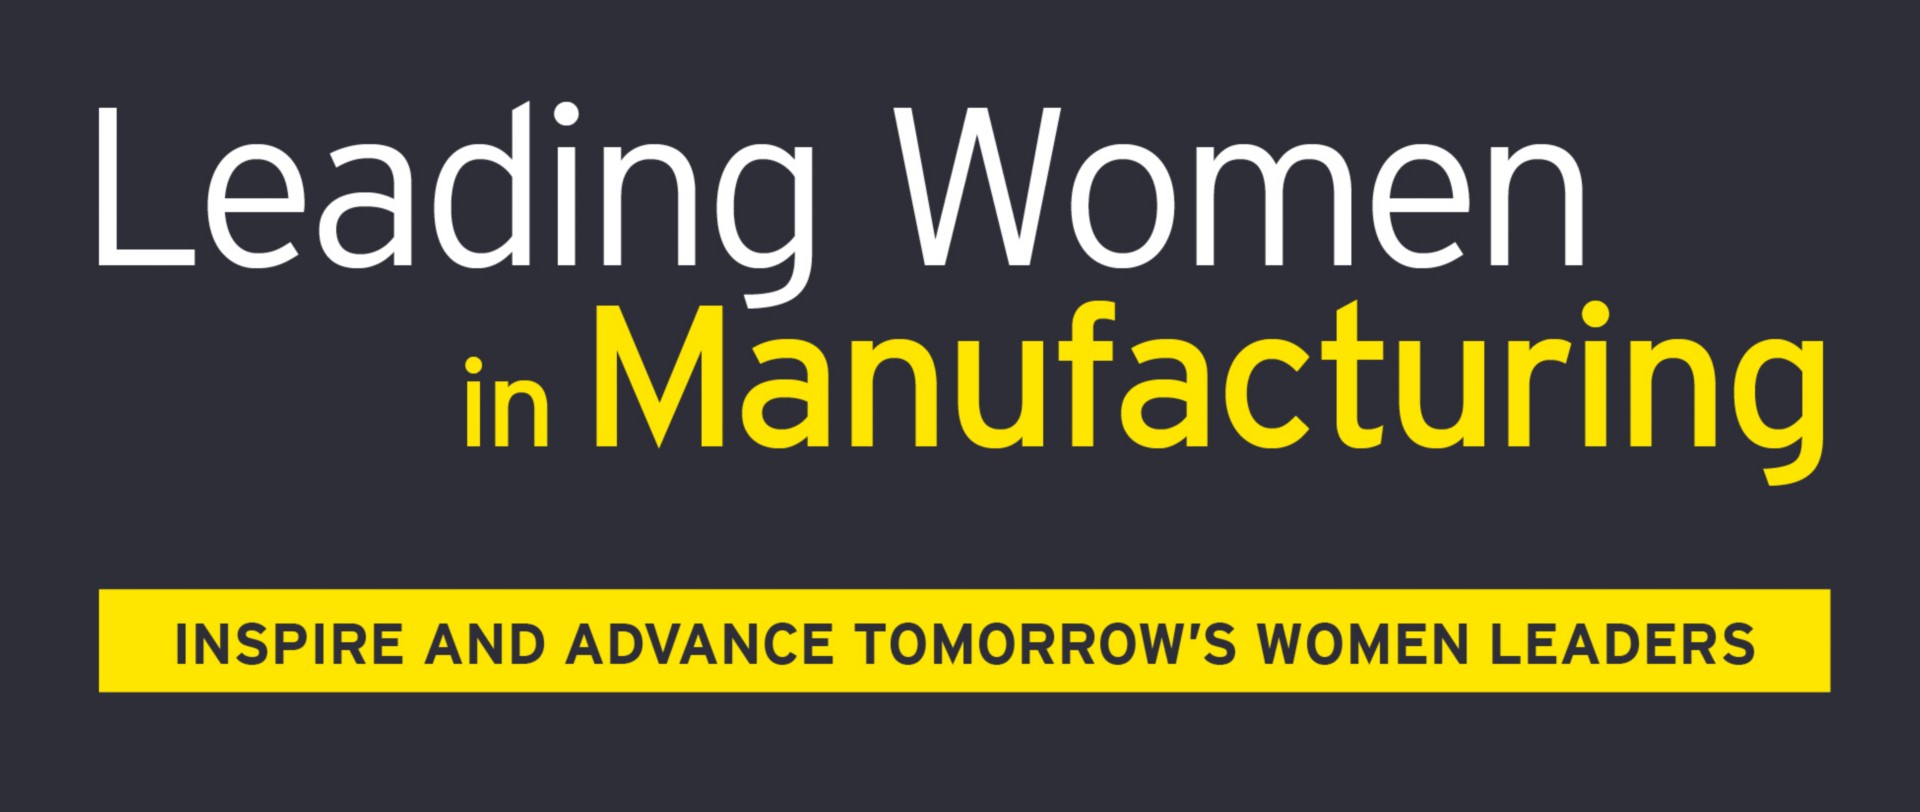 EY - Leading Women in Manufacturing